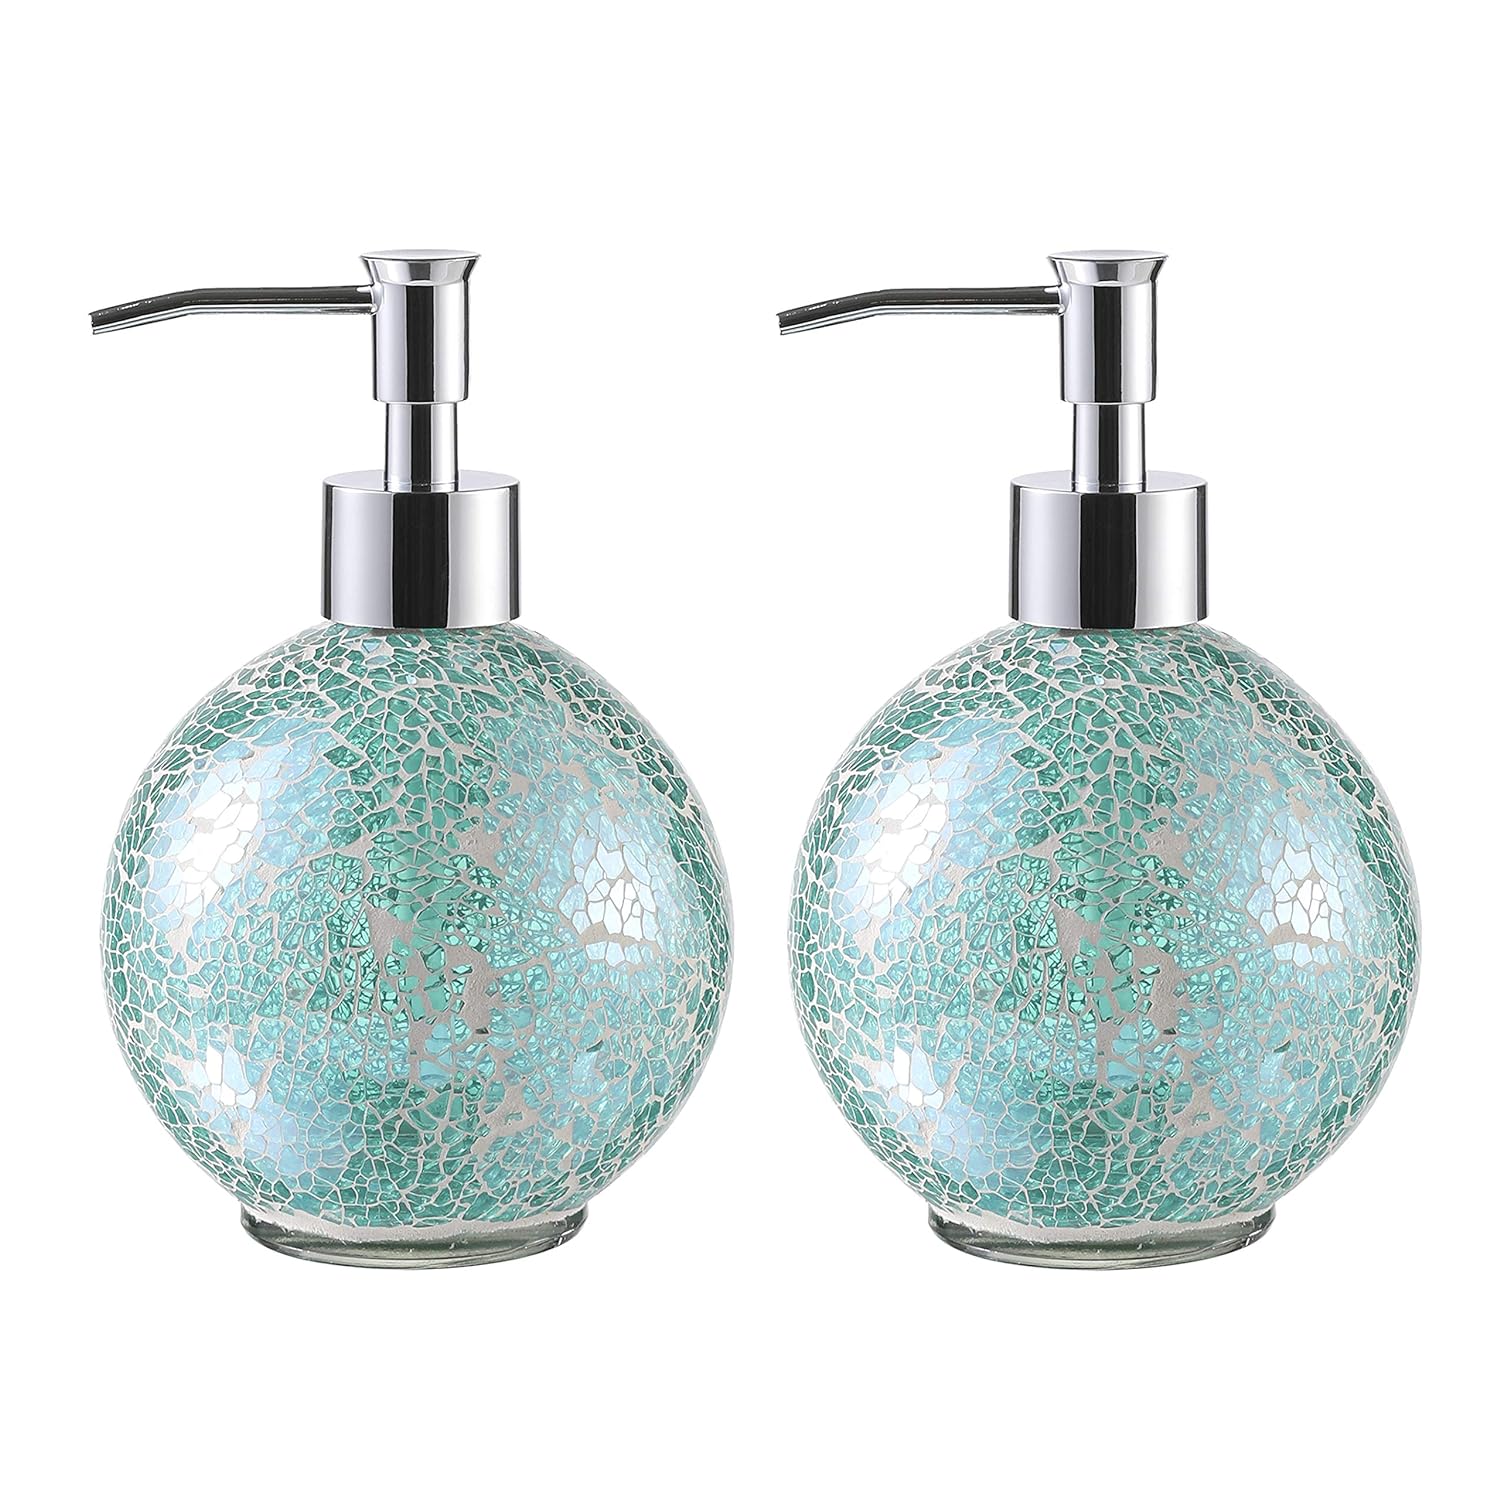 Bought as a replacement soap dispenser for an existing robins egg blue mosaic set that had a white metal top that was showing signs of corrosion from soap drips coming off the spout. That exact pump was available on Amazon from another seller but Im so glad I gambled these would match close enough and eliminate the issue. They both arrived safely in the most secure and cushiony inside packaging I have ever seen! Excellent design, quality and care. I give a lot of things 4/5 stars, but if I cou